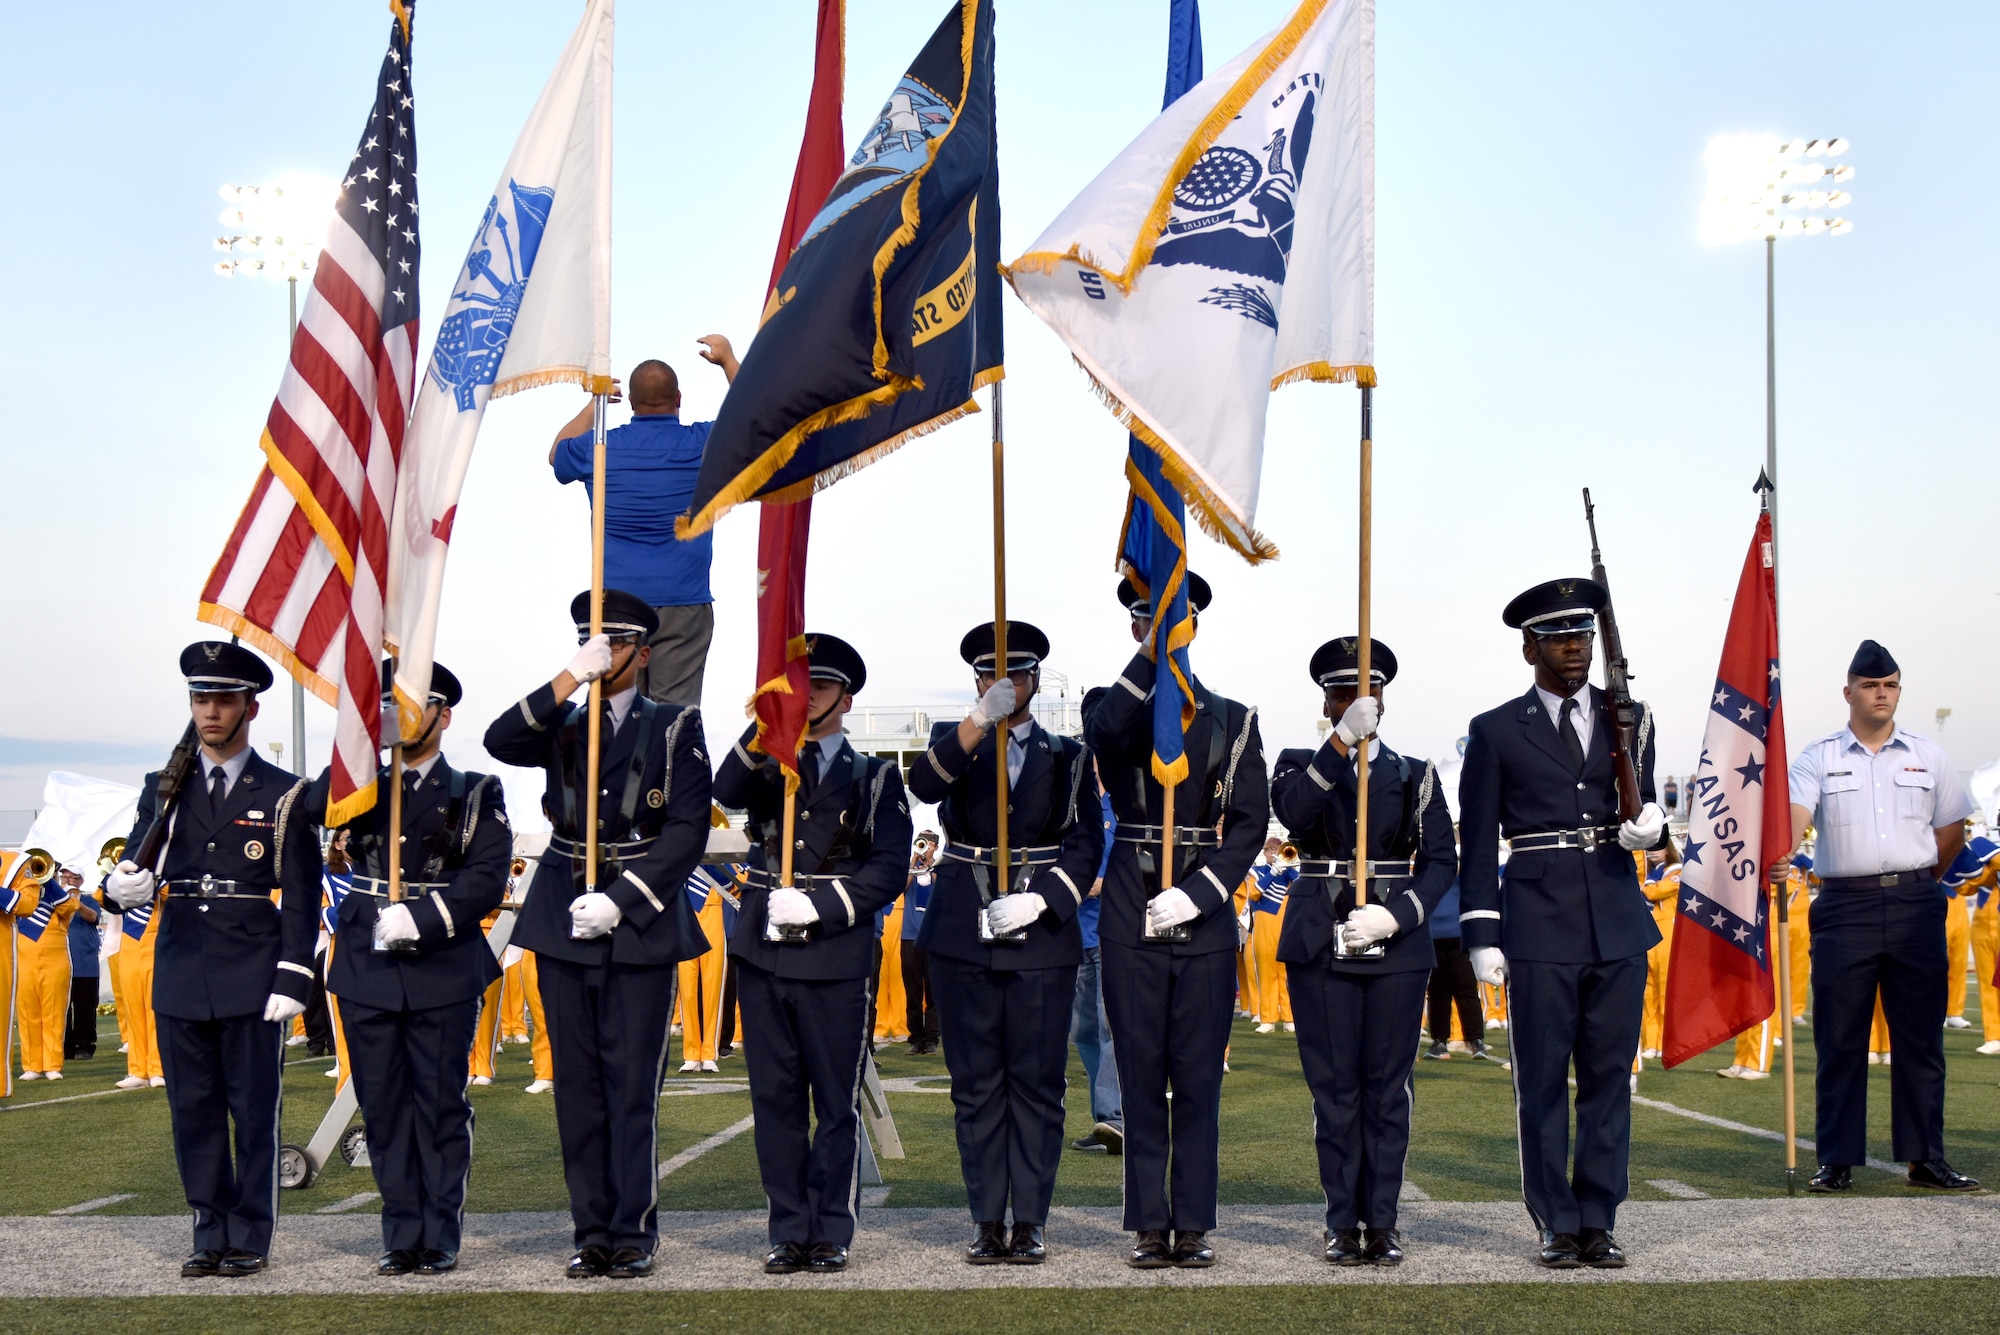 Goodfellow Honor Guard members present the colors during the halftime show of the Angelo State University vs Simon Fraser University game during military appreciation night at the 1st Community Credit Union Field, San Angelo, Texas, Sept. 14, 2019. Military members and their families could attend the 2019 Ram Jam and game for free with a valid military ID. (U.S. Air Force photo by Senior Airman Seraiah Wolf/Released)